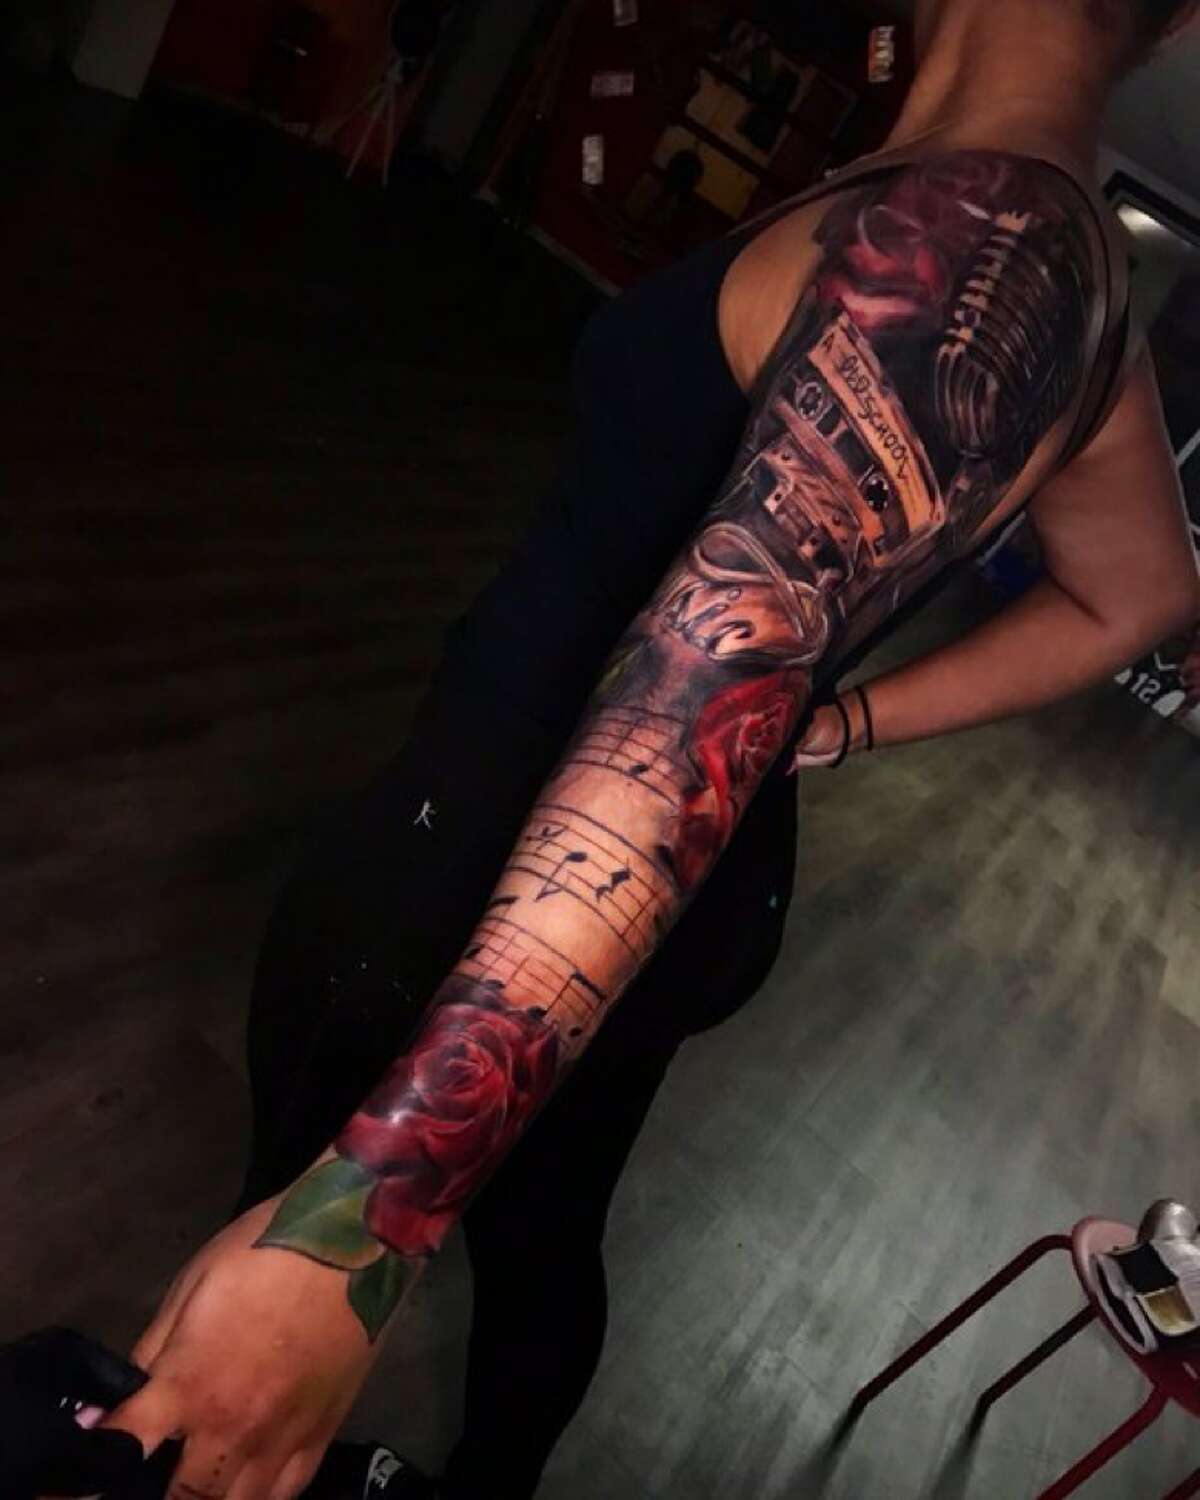 Fran Voltaire began tattooing full-time about three years ago. Since then, she's made it her mission to help others through her art by doing free self-harm cover ups.